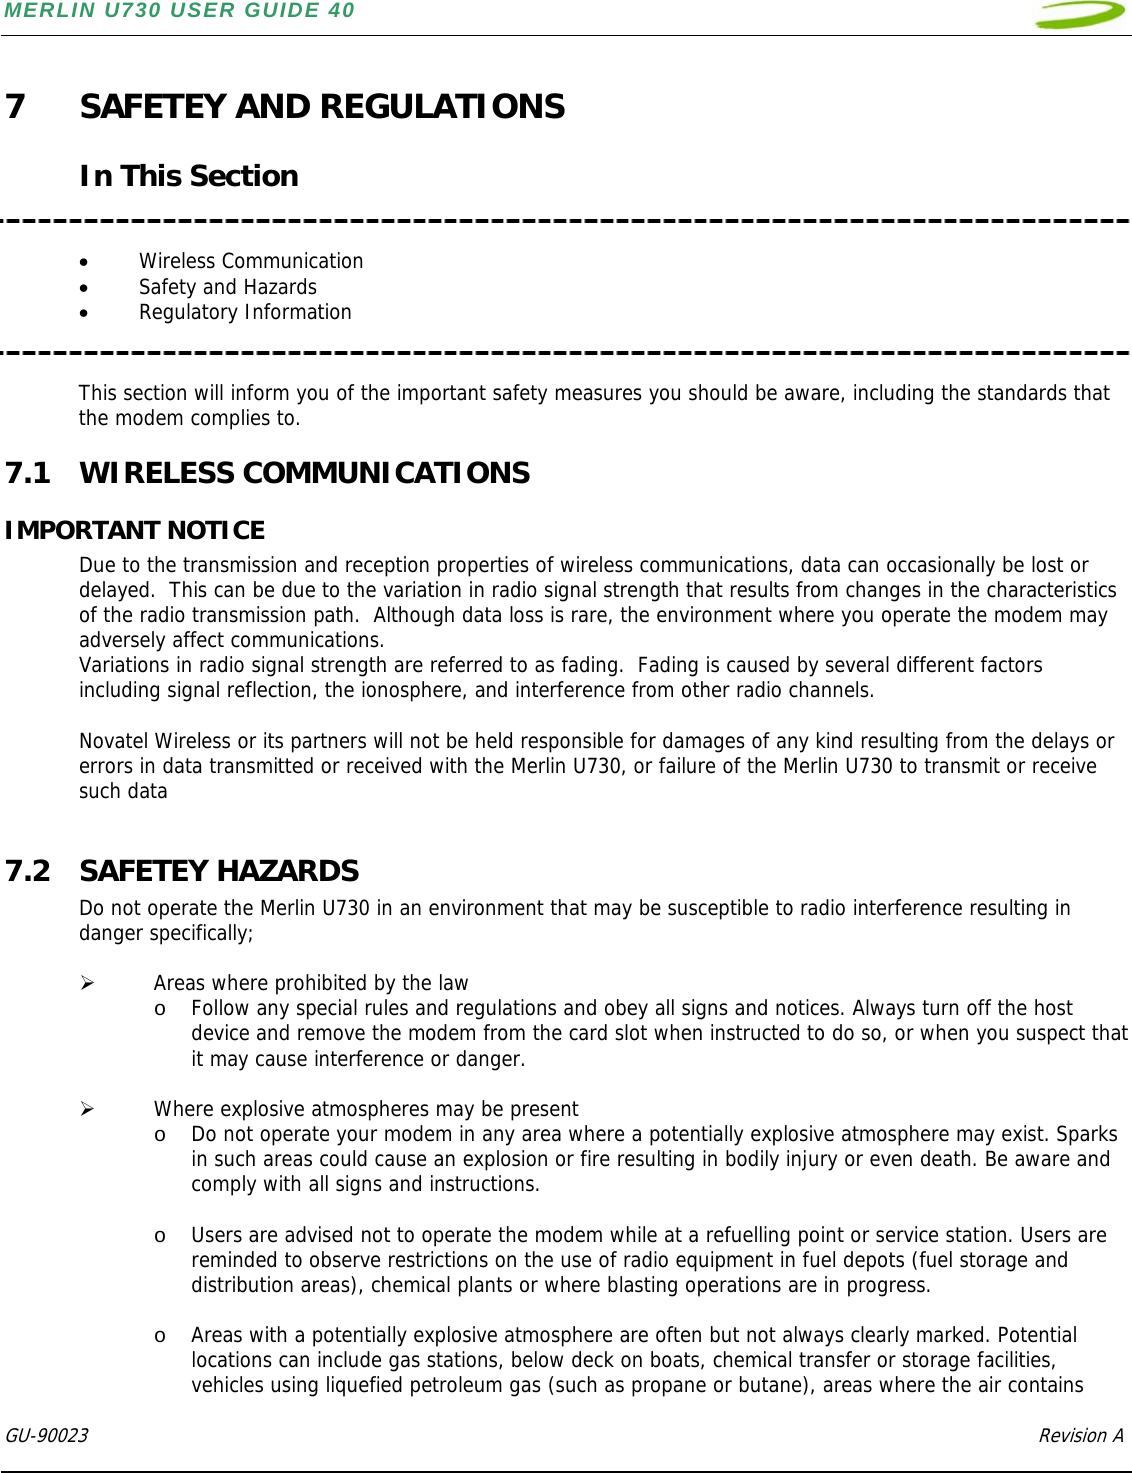 MERLIN U730 USER GUIDE 40  GU-90023            Revision A   7 SAFETEY AND REGULATIONS  In This Section   • Wireless Communication • Safety and Hazards • Regulatory Information   This section will inform you of the important safety measures you should be aware, including the standards that the modem complies to. 7.1 WIRELESS COMMUNICATIONS IMPORTANT NOTICE Due to the transmission and reception properties of wireless communications, data can occasionally be lost or delayed.  This can be due to the variation in radio signal strength that results from changes in the characteristics of the radio transmission path.  Although data loss is rare, the environment where you operate the modem may adversely affect communications. Variations in radio signal strength are referred to as fading.  Fading is caused by several different factors including signal reflection, the ionosphere, and interference from other radio channels.   Novatel Wireless or its partners will not be held responsible for damages of any kind resulting from the delays or errors in data transmitted or received with the Merlin U730, or failure of the Merlin U730 to transmit or receive such data  7.2 SAFETEY HAZARDS Do not operate the Merlin U730 in an environment that may be susceptible to radio interference resulting in danger specifically;  ¾ Areas where prohibited by the law o Follow any special rules and regulations and obey all signs and notices. Always turn off the host device and remove the modem from the card slot when instructed to do so, or when you suspect that it may cause interference or danger.  ¾ Where explosive atmospheres may be present o Do not operate your modem in any area where a potentially explosive atmosphere may exist. Sparks in such areas could cause an explosion or fire resulting in bodily injury or even death. Be aware and comply with all signs and instructions.  o Users are advised not to operate the modem while at a refuelling point or service station. Users are reminded to observe restrictions on the use of radio equipment in fuel depots (fuel storage and distribution areas), chemical plants or where blasting operations are in progress.   o Areas with a potentially explosive atmosphere are often but not always clearly marked. Potential locations can include gas stations, below deck on boats, chemical transfer or storage facilities, vehicles using liquefied petroleum gas (such as propane or butane), areas where the air contains 